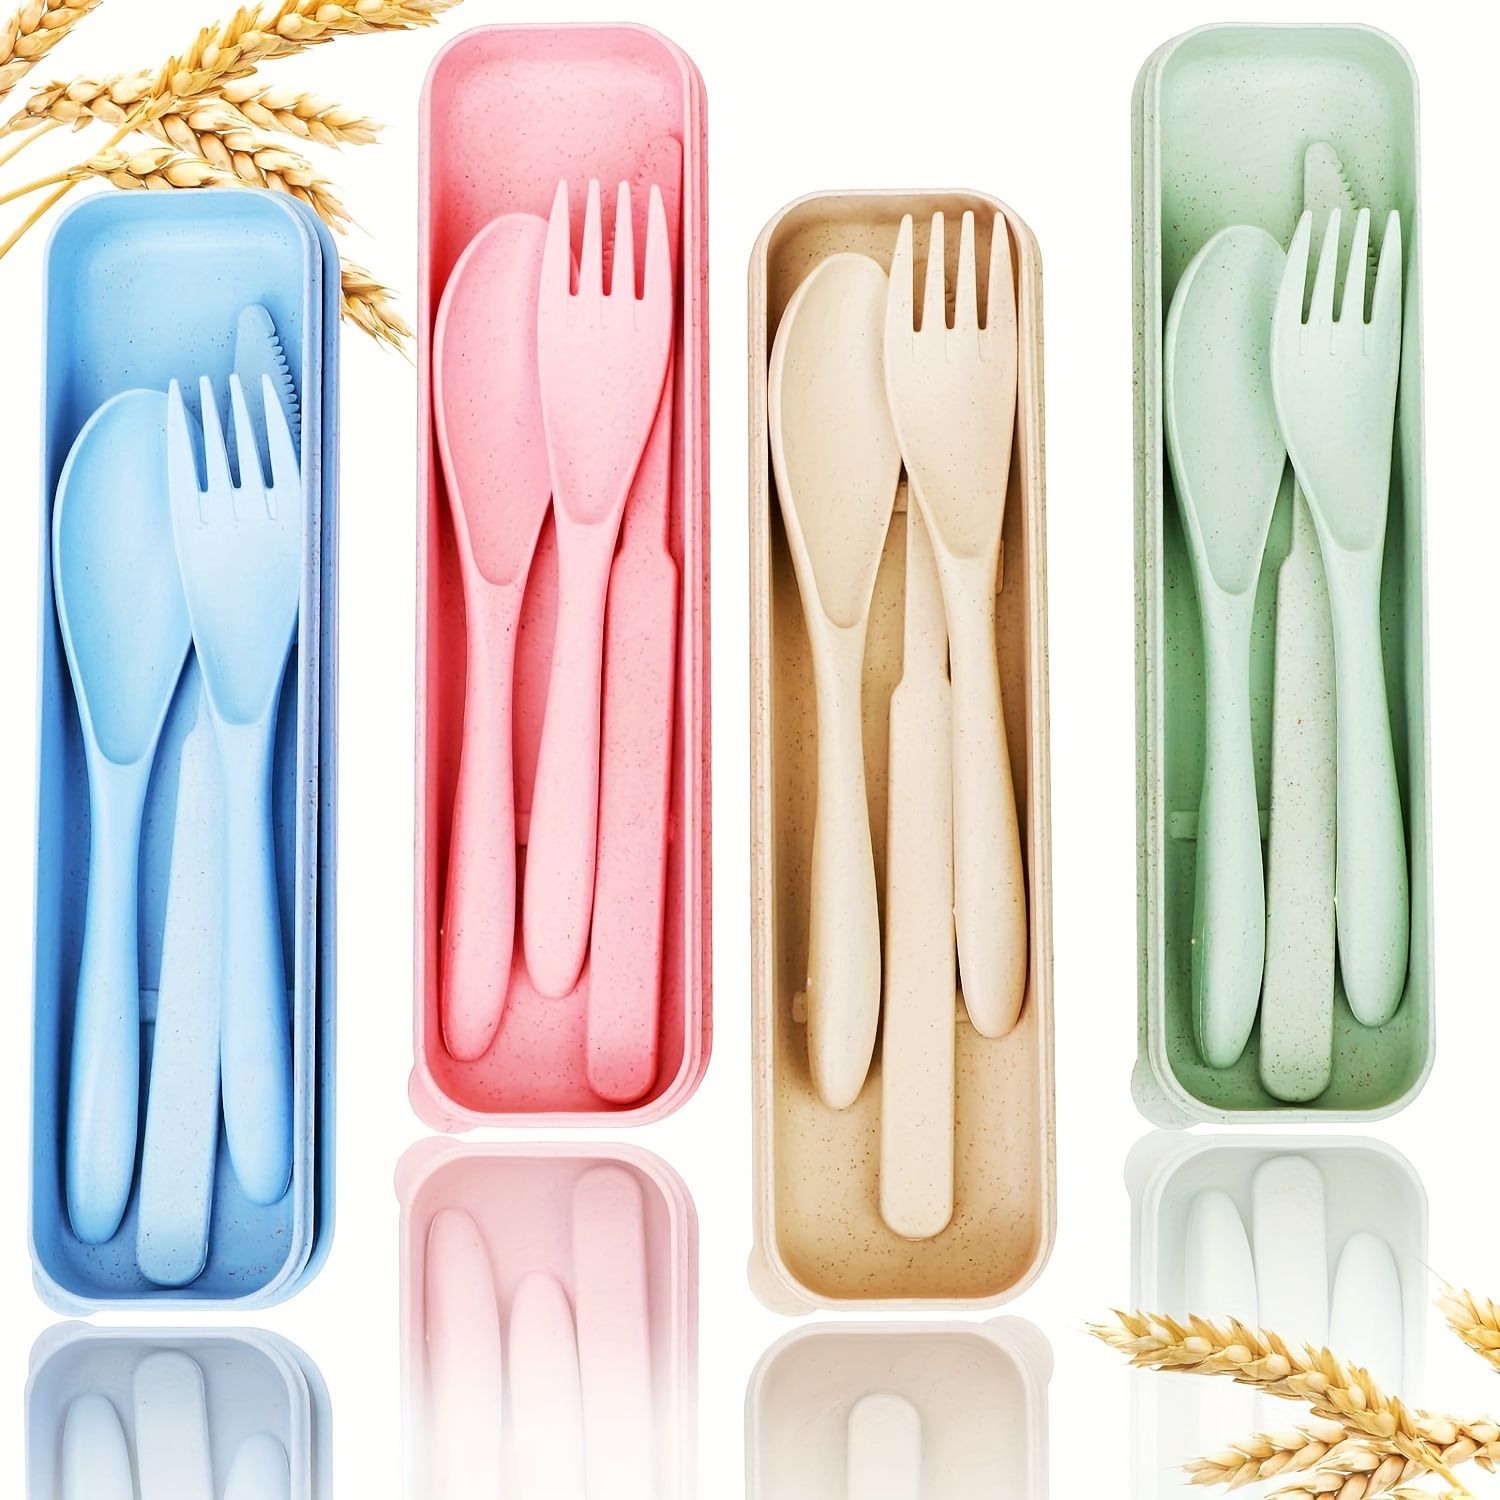 Travel Cutlery Set With Case, Set Of 2 Reusable Plastic Cutlery